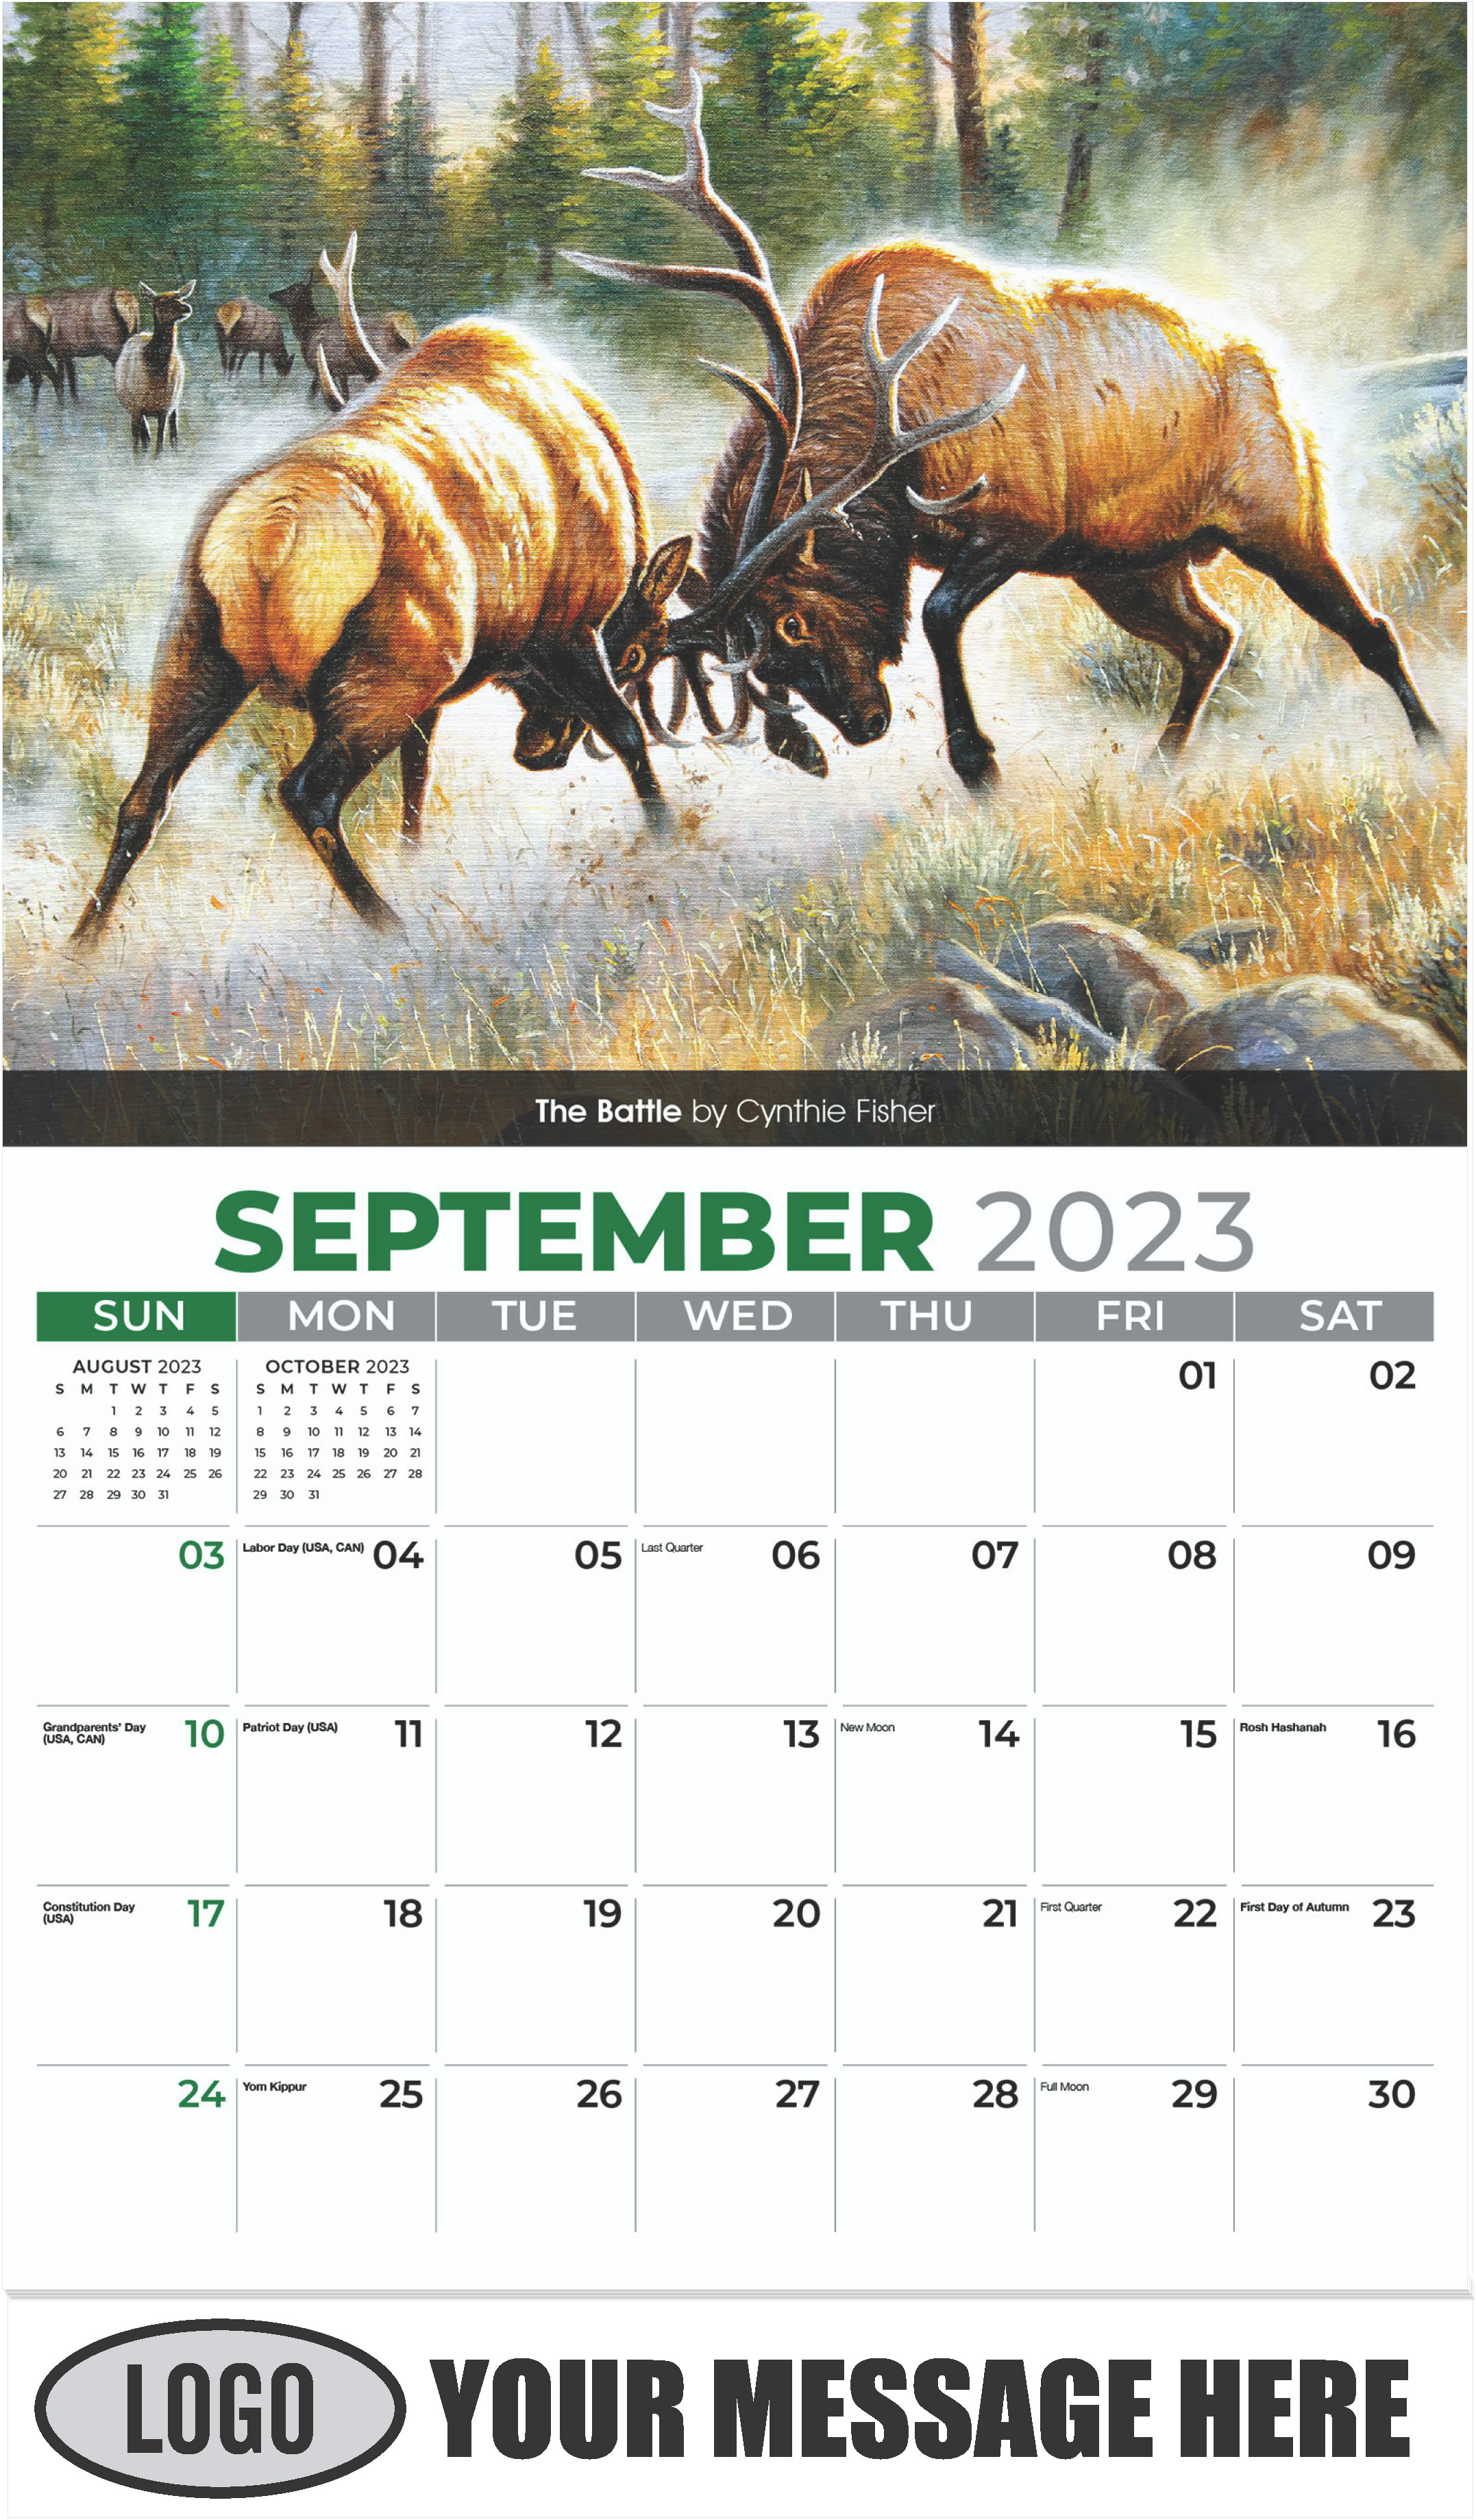 The Battle by Cynthie Fisher - September - Wildlife Portraits 2023 Promotional Calendar